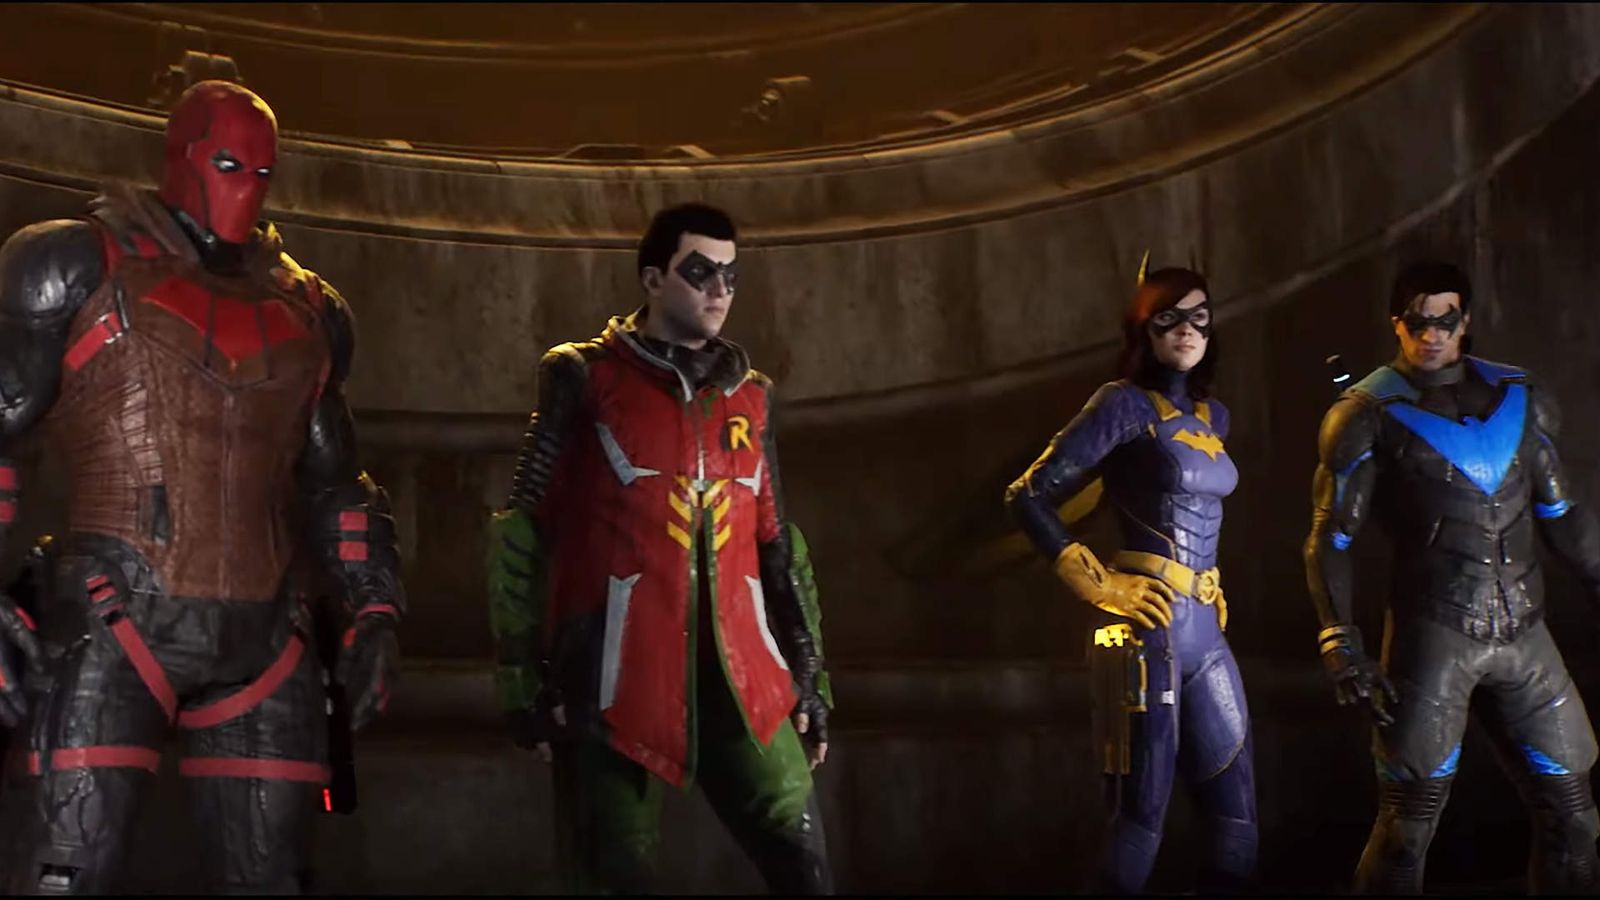 gotham knights protagonists red hood, robin, batgirl and nightwing